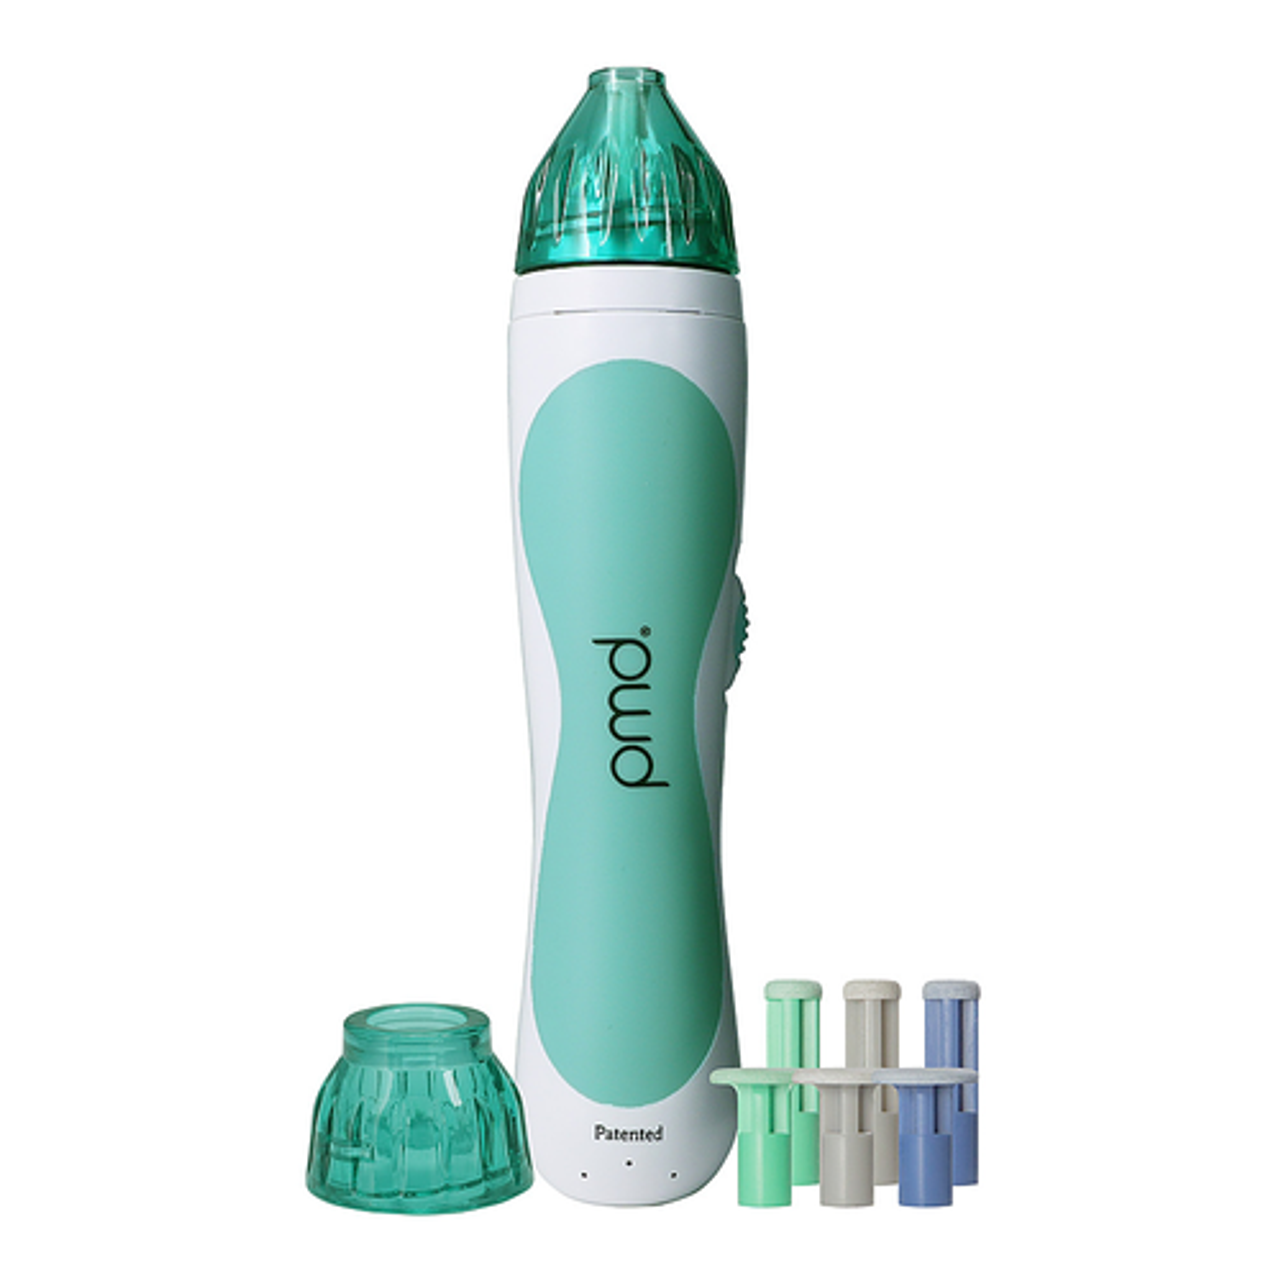 PMD Beauty - PMD Personal Microderm Classic - Teal